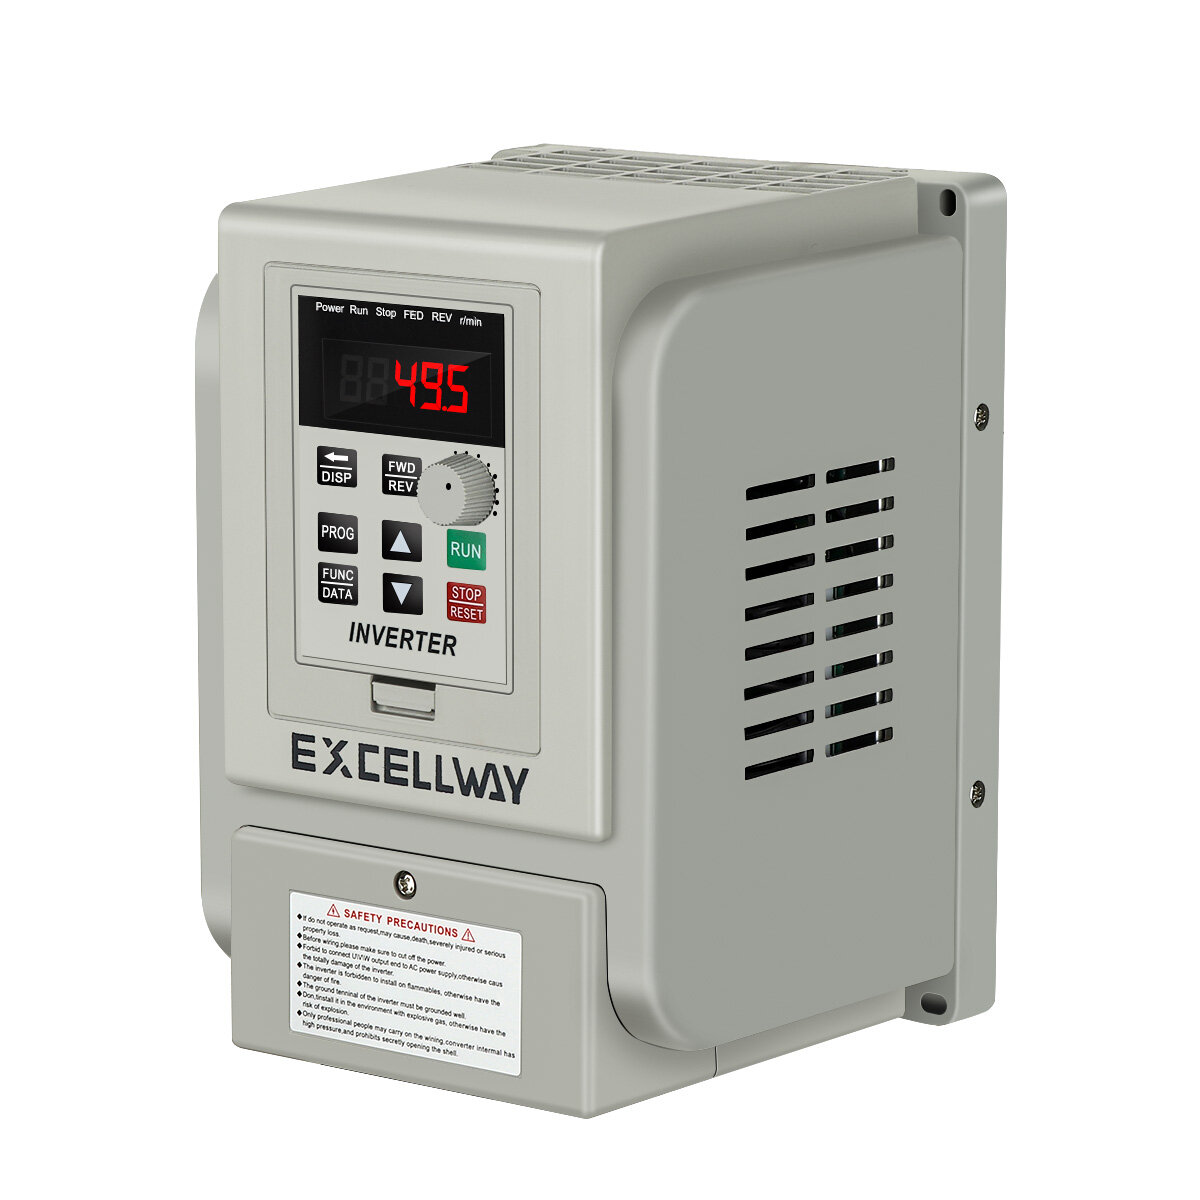 best price,excellway,3kw,220v,pwm,control,inverter,1phase,input,3phase,out,discount